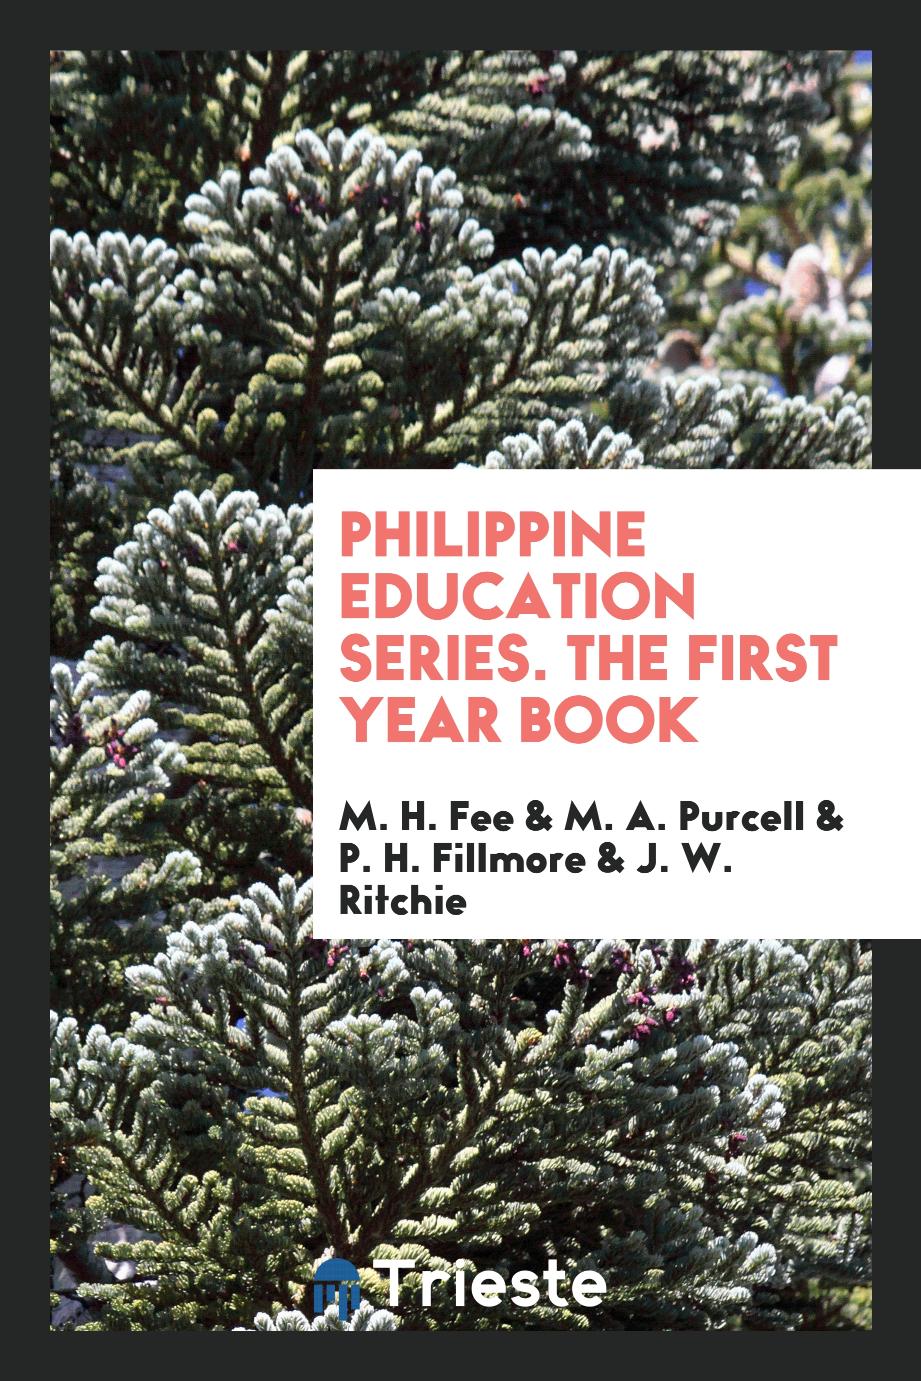 Philippine Education Series. The First Year Book